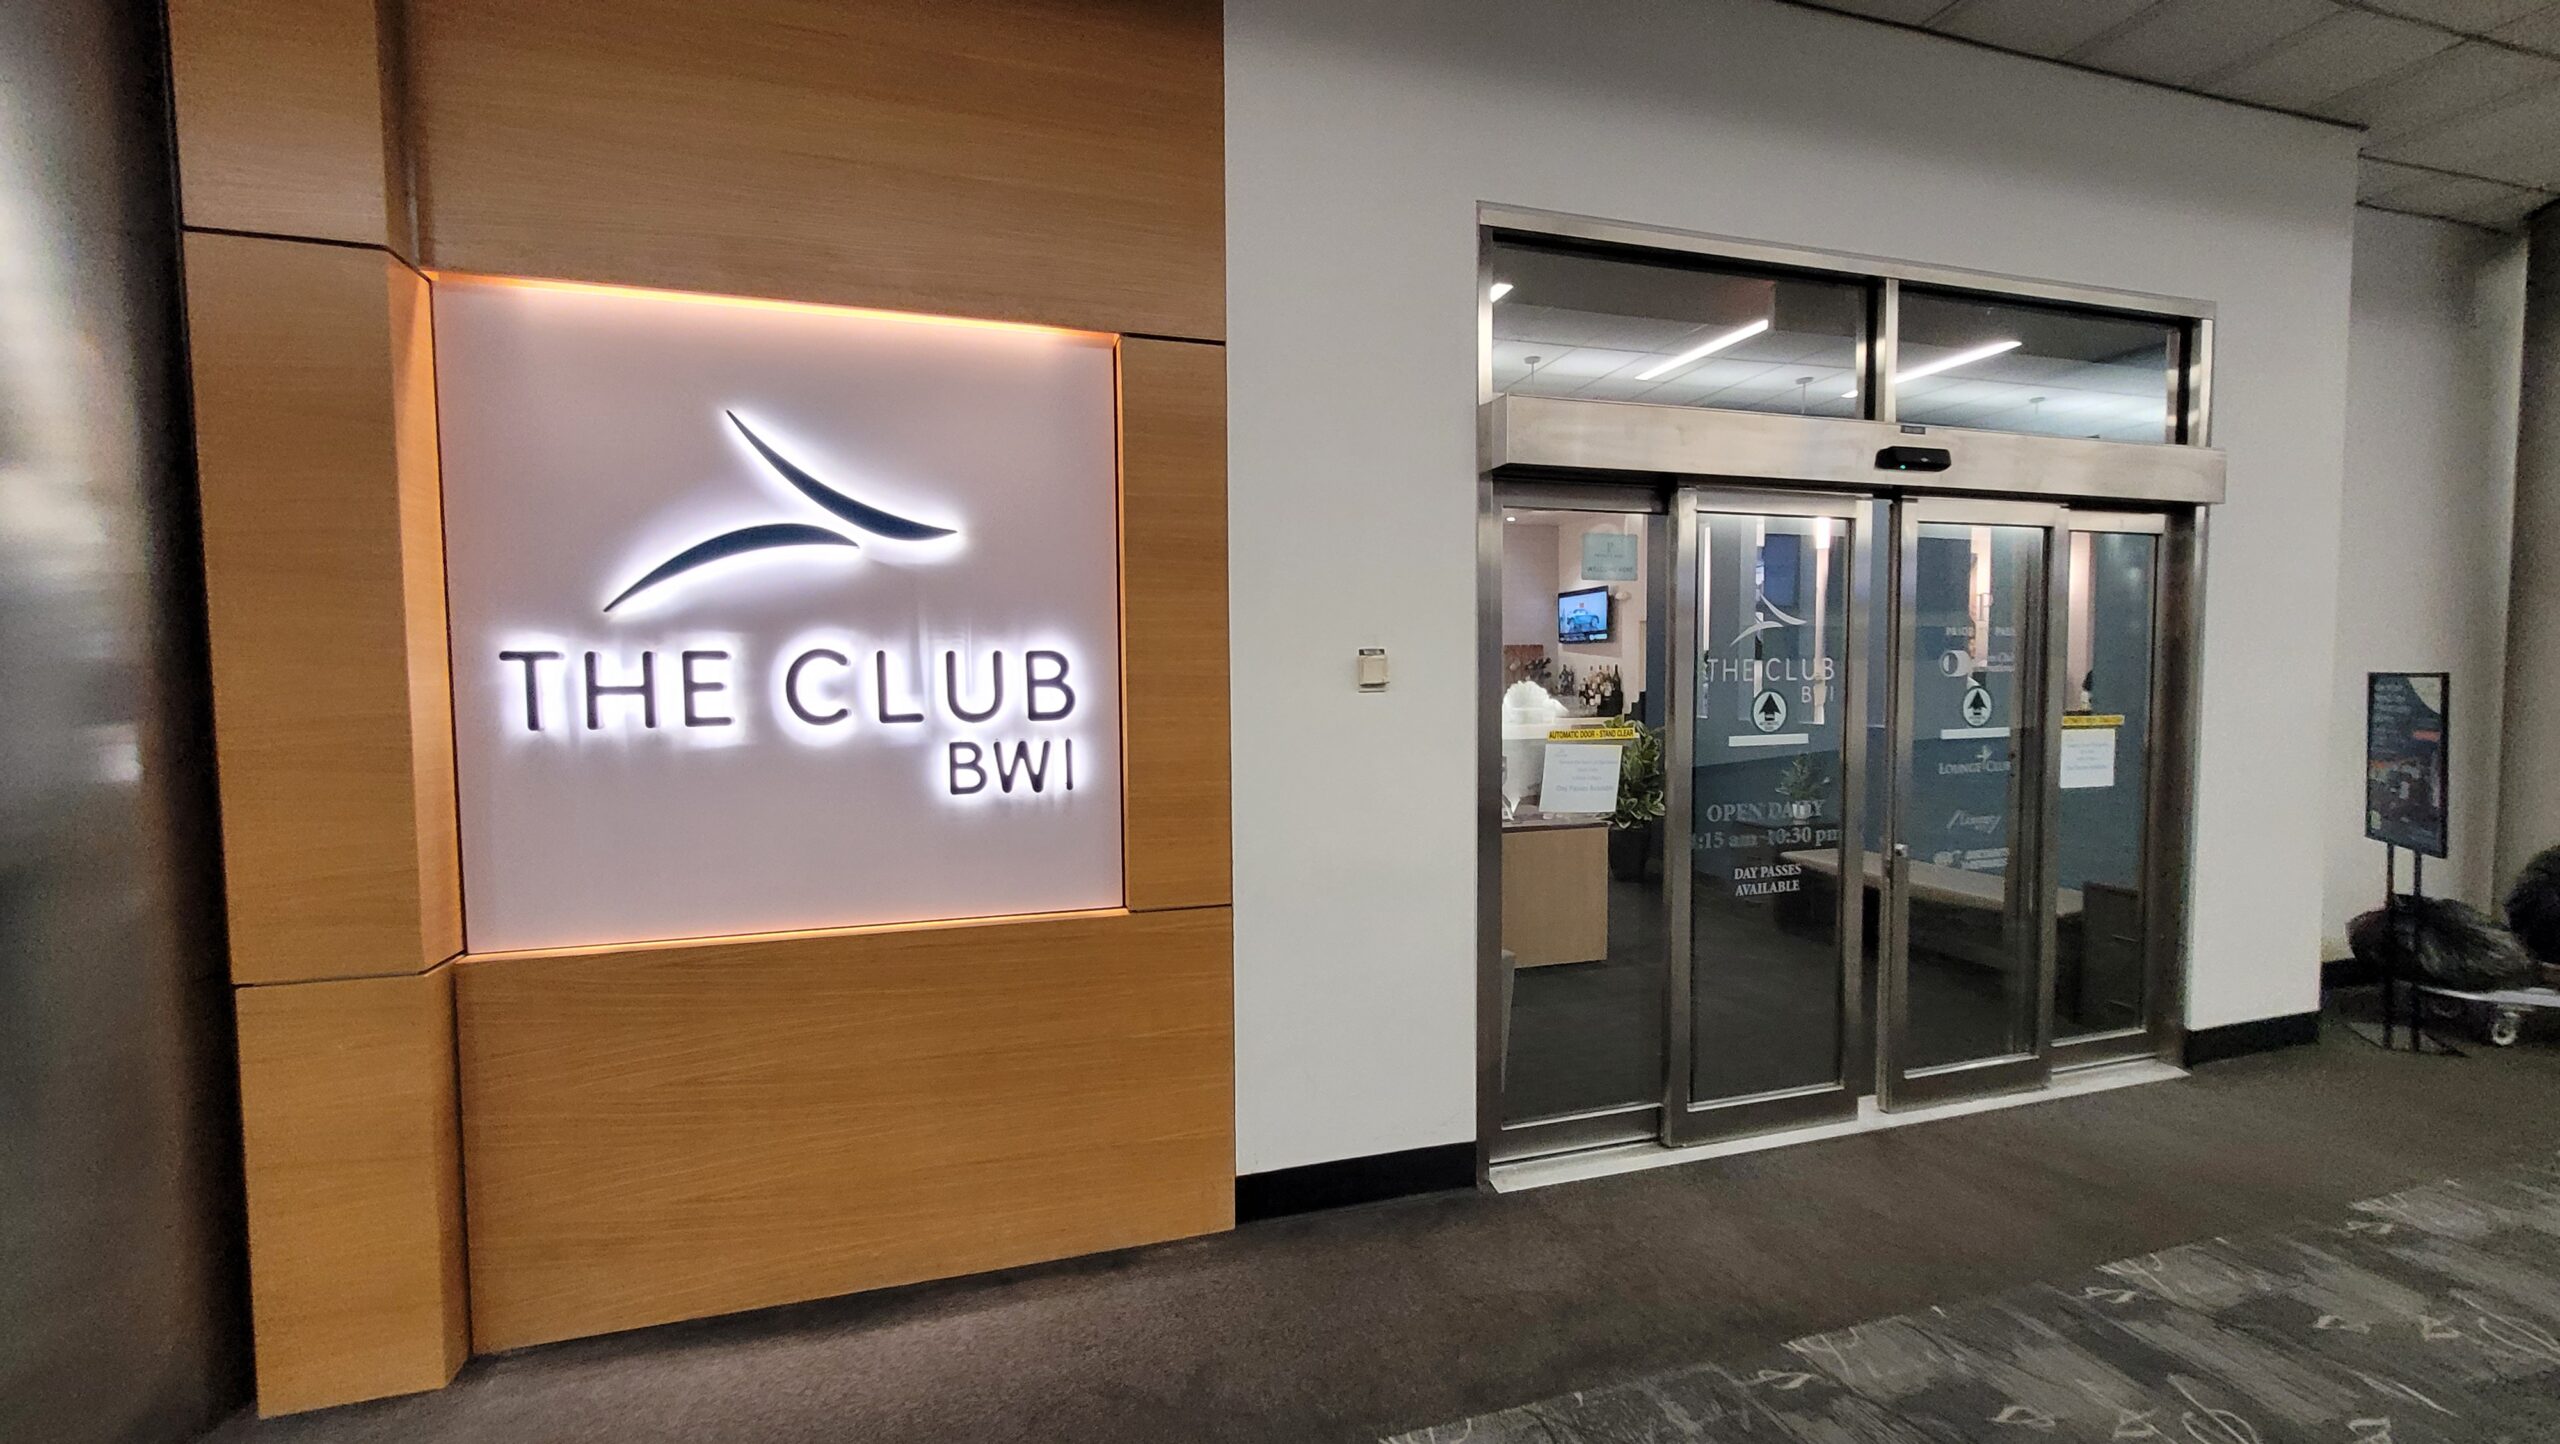 The Club at BWI – A Compact but Adequate Lounge